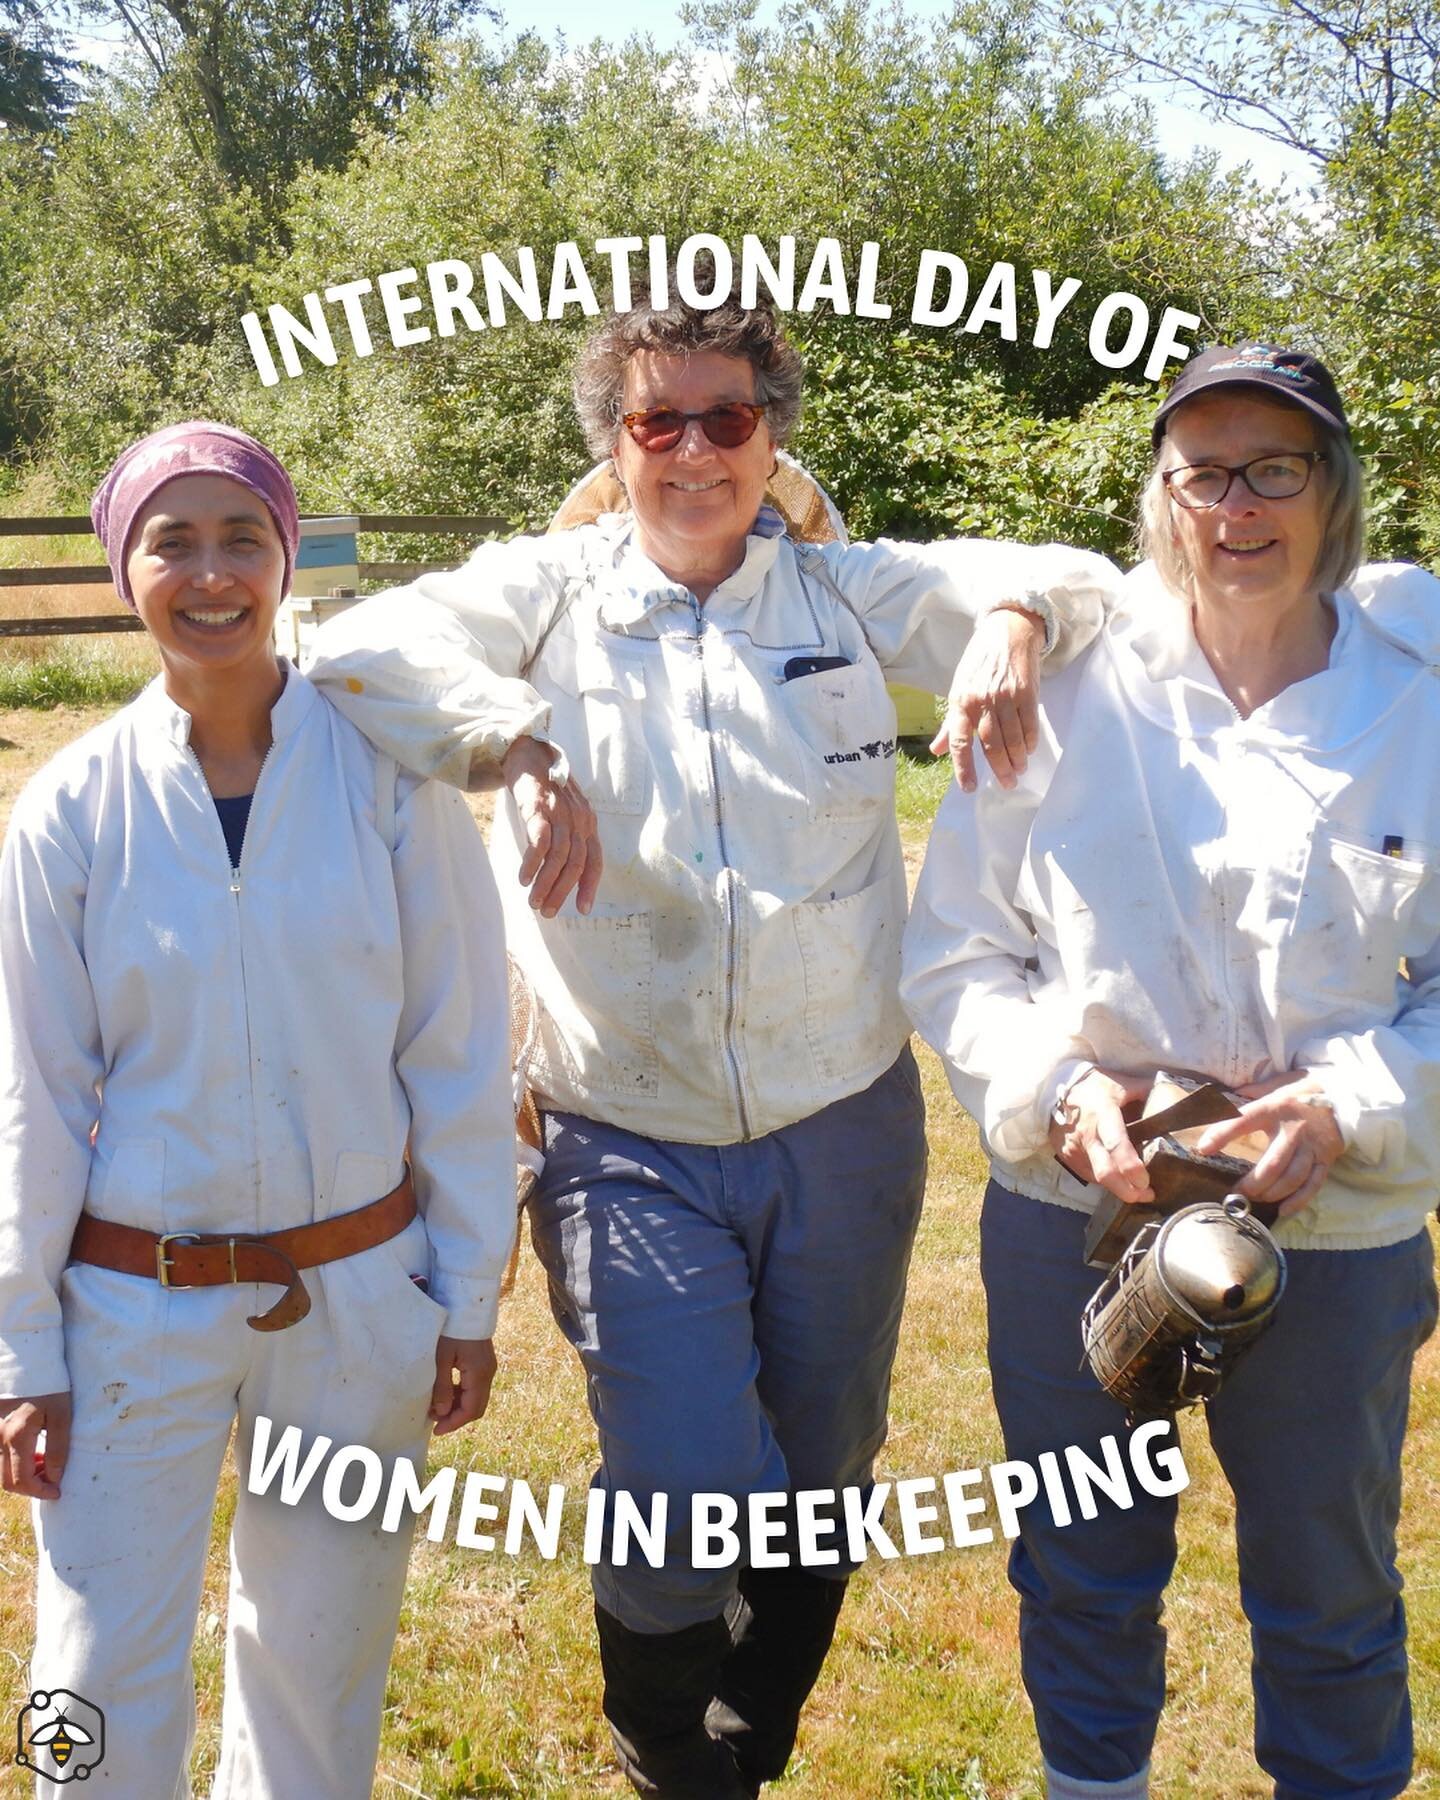 Tomorrow marks the first ever International Day of Women in Beekeeping! We deeply appreciate the women here at the BC-TTP and the BCHPA and all the hard work they do to keep our hive thriving. Grateful for our beekeeping community and excited to see 